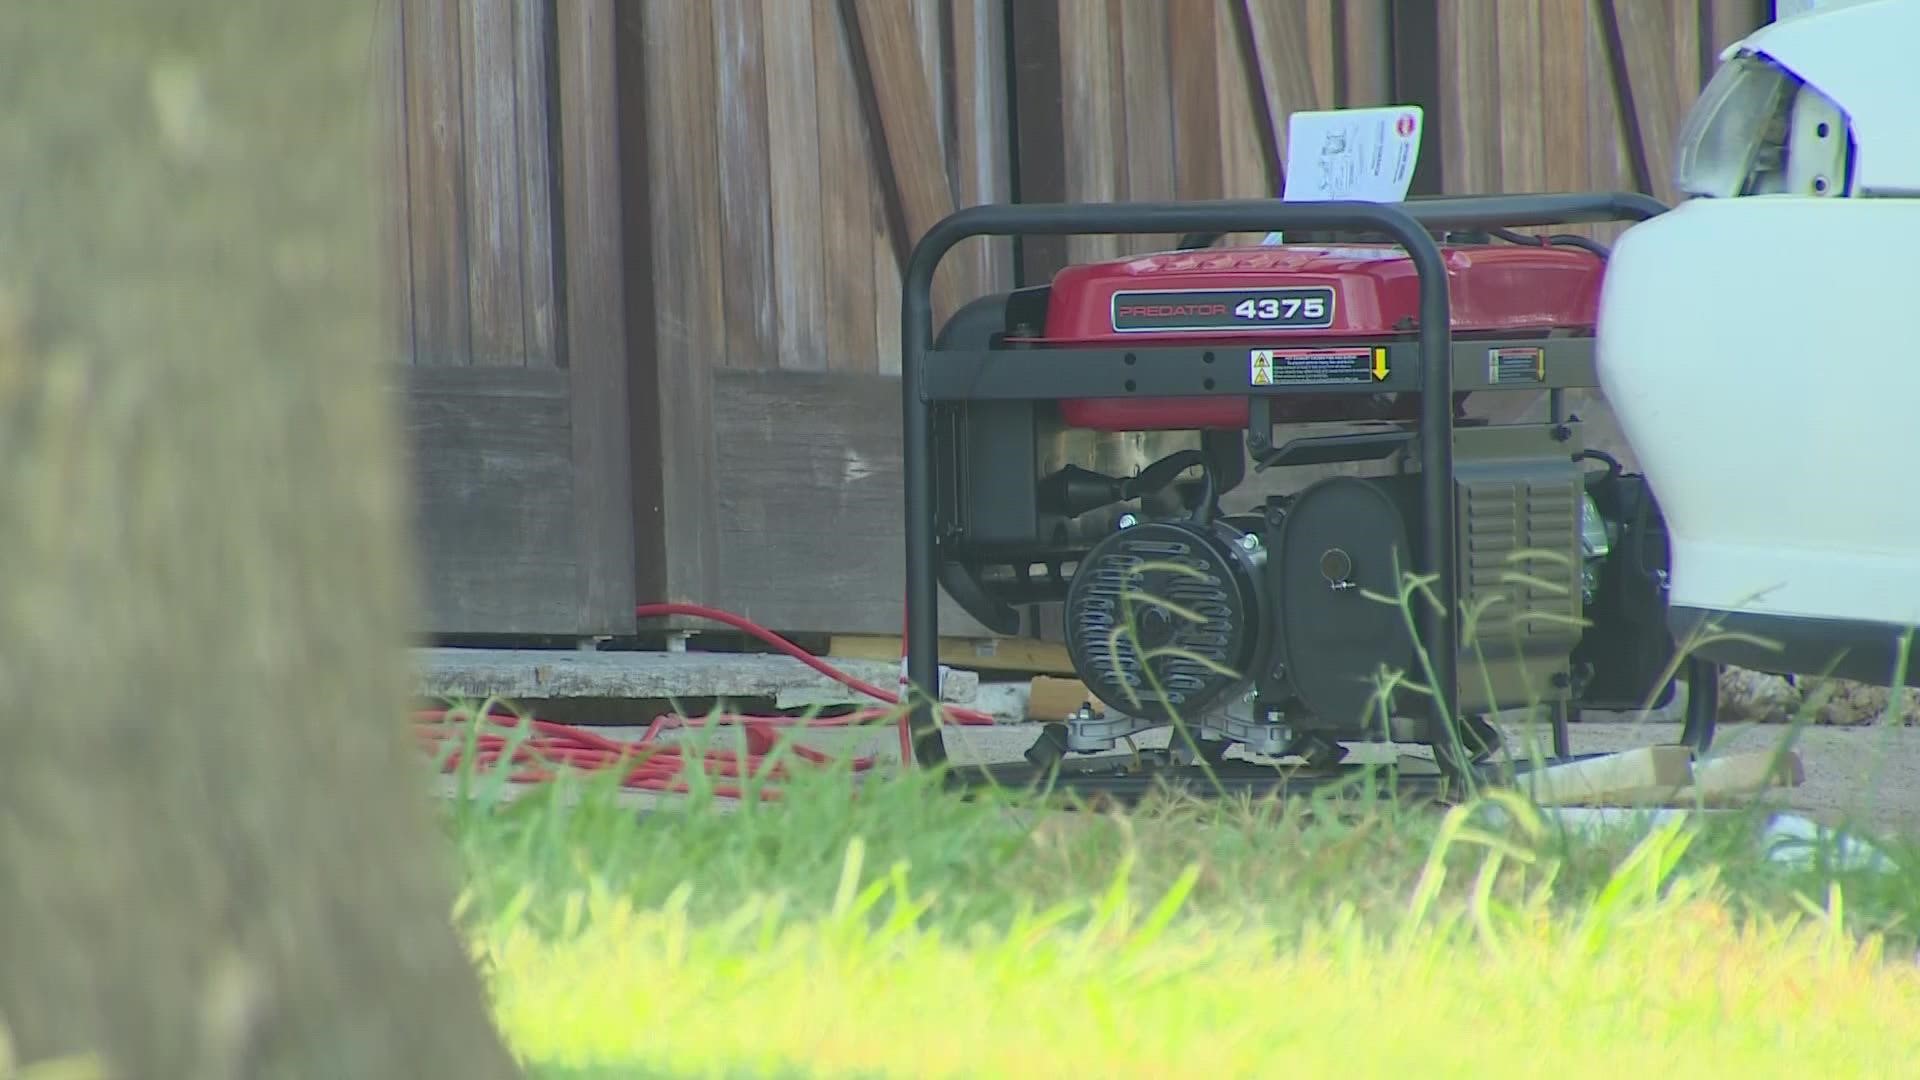 North Texas saw temperatures in the triple digits this weekend, which didn't bode well for some residents who lost power.